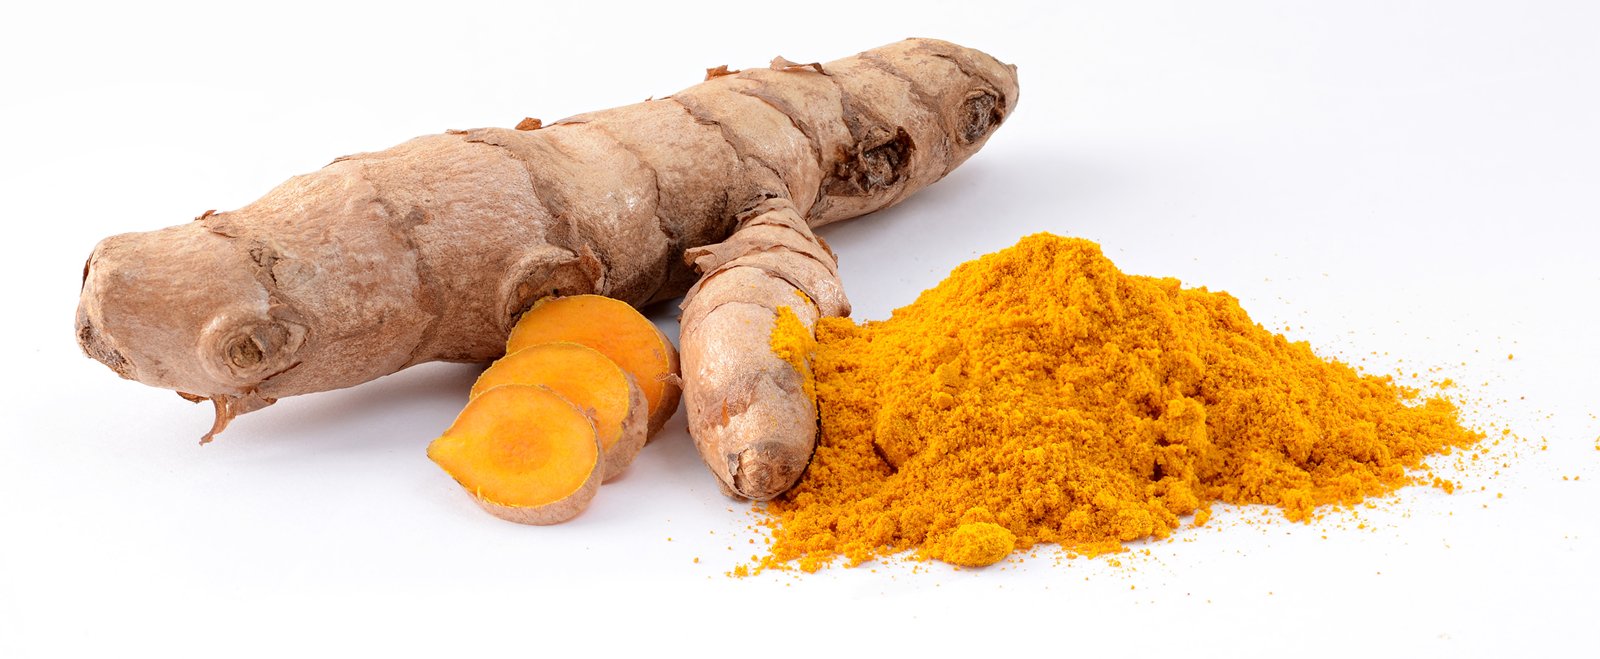 curcumin-extract-reduces-fatty-liver-diseases